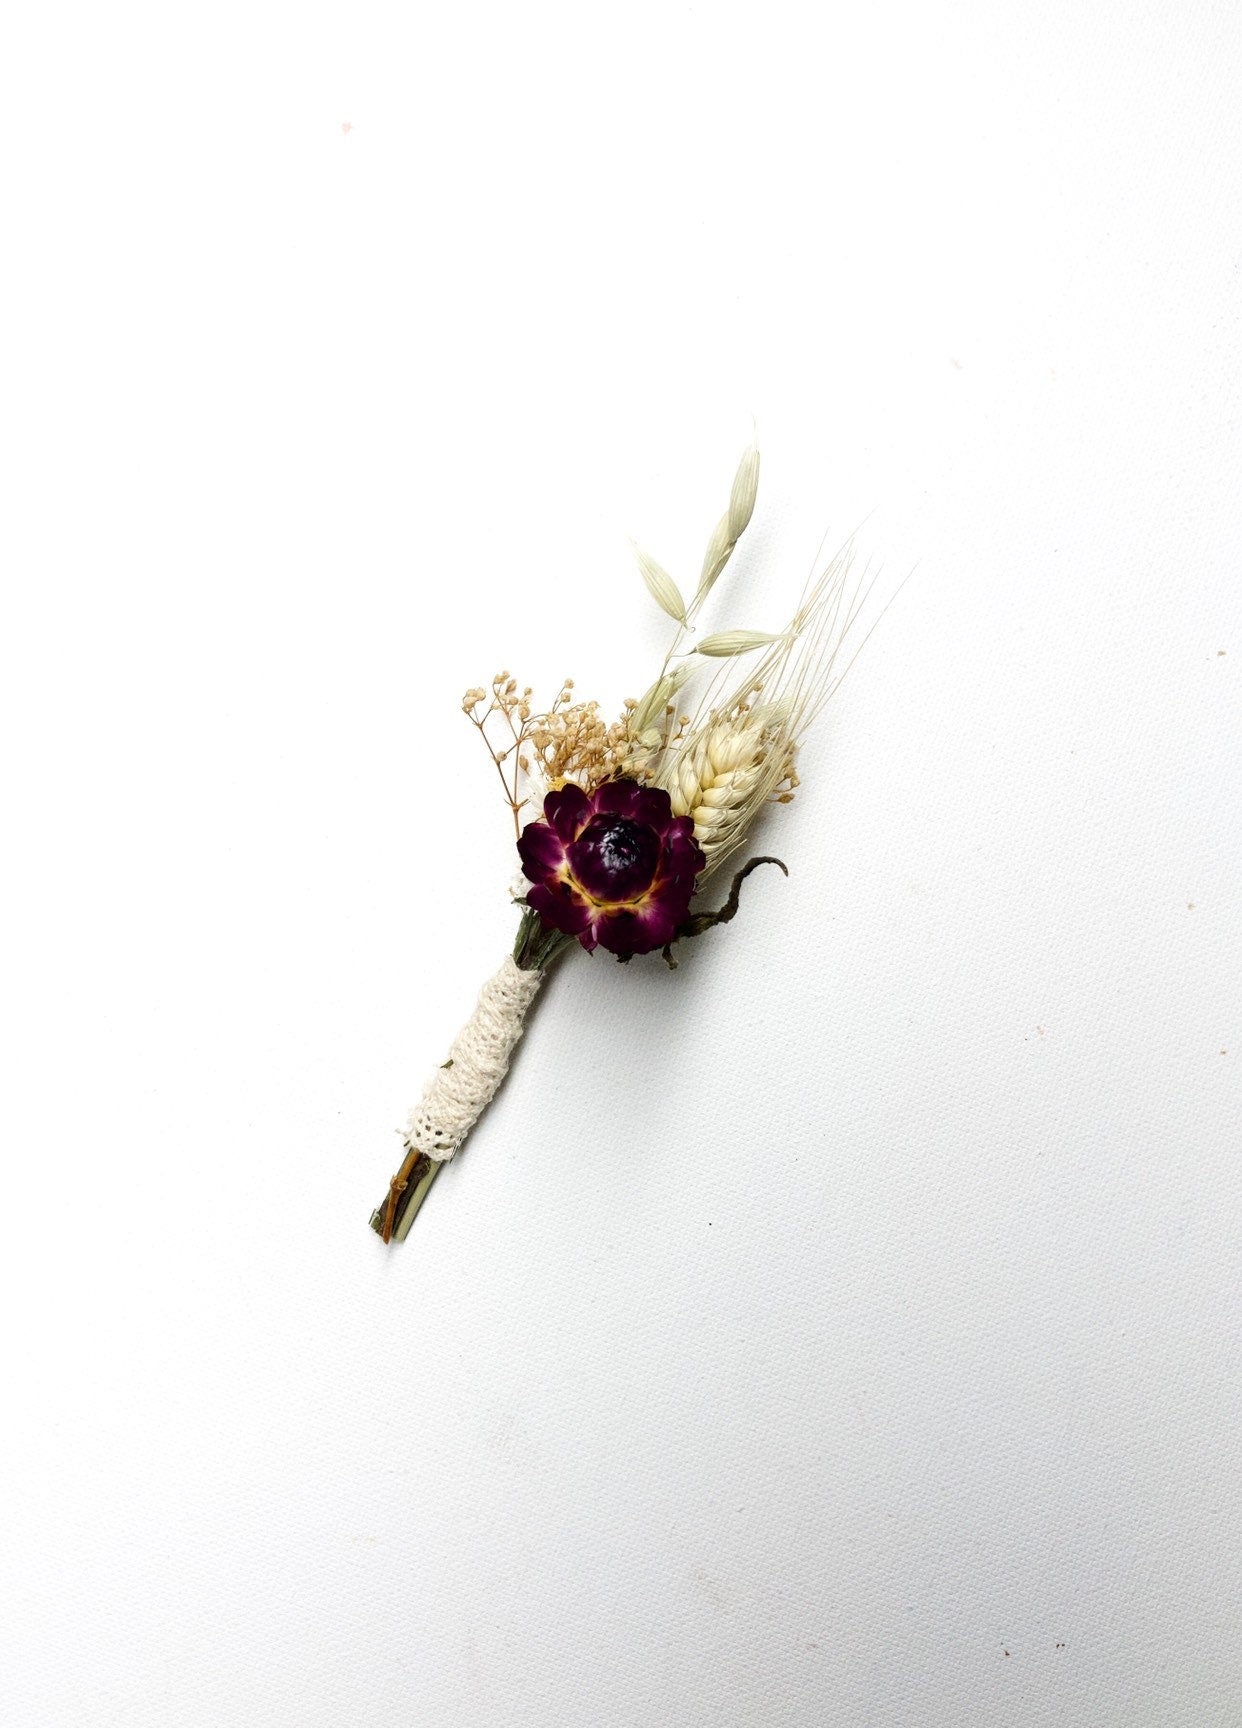 Fall Wedding Bouquet, Dried Flowers, Bridal, Strawflowers, Oats, Coxcomb, Celosia, Red, Burgundy, Beige, White, Simple, Gentle, Wheat